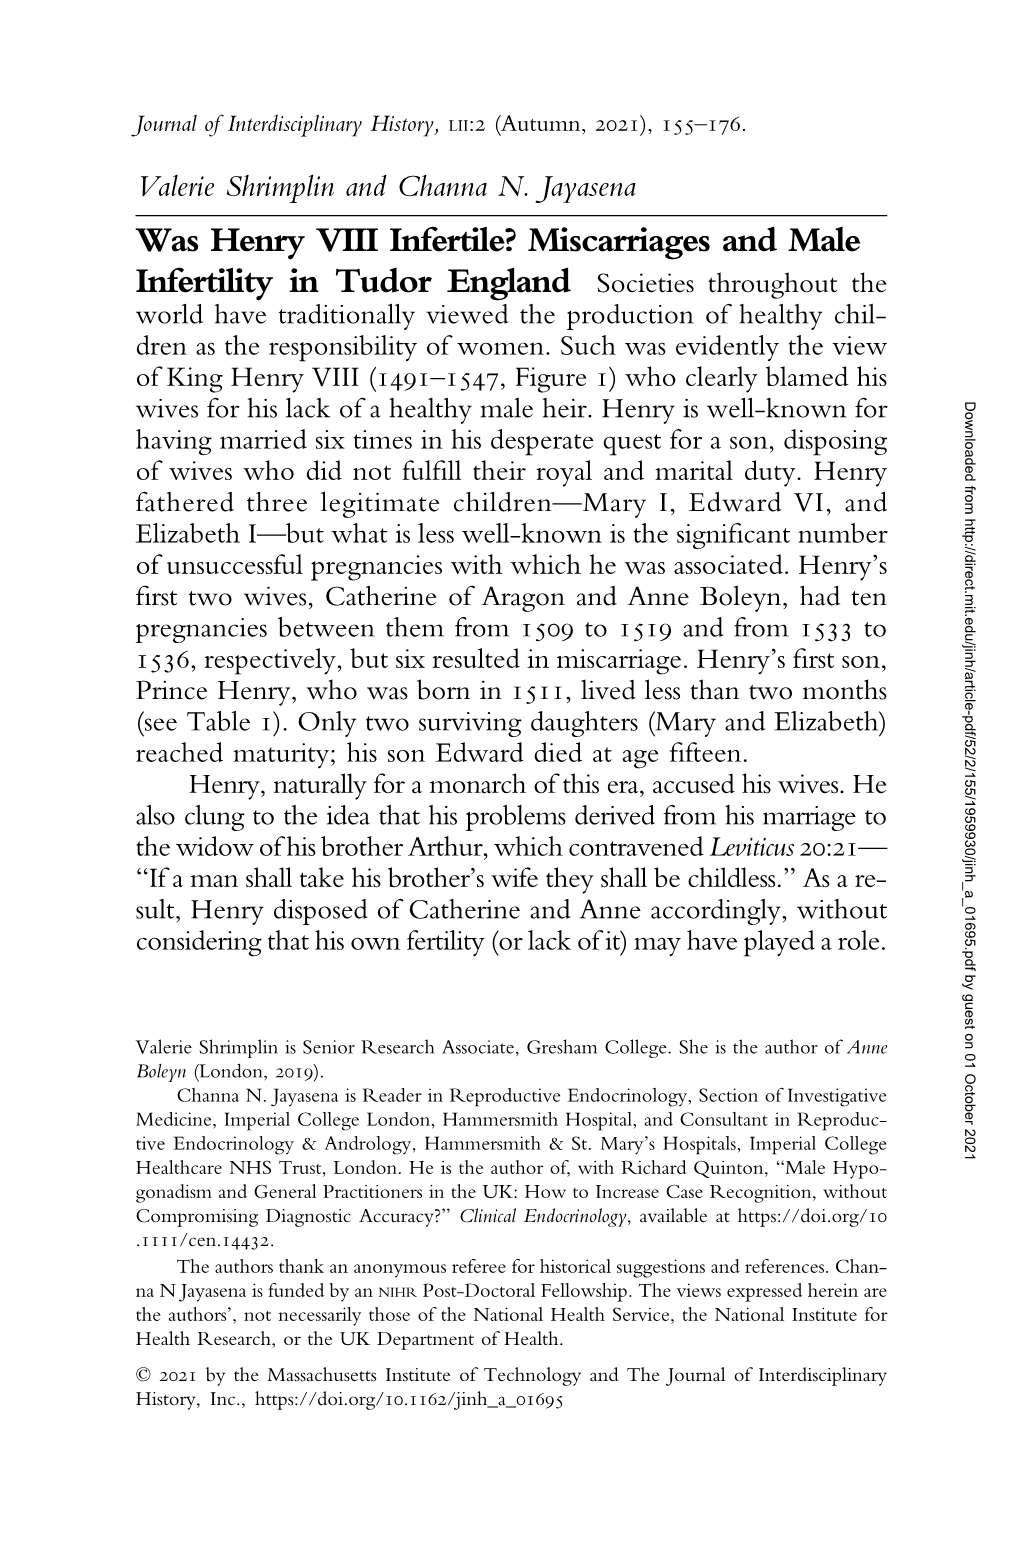 Miscarriages and Male Infertility in Tudor England Societies